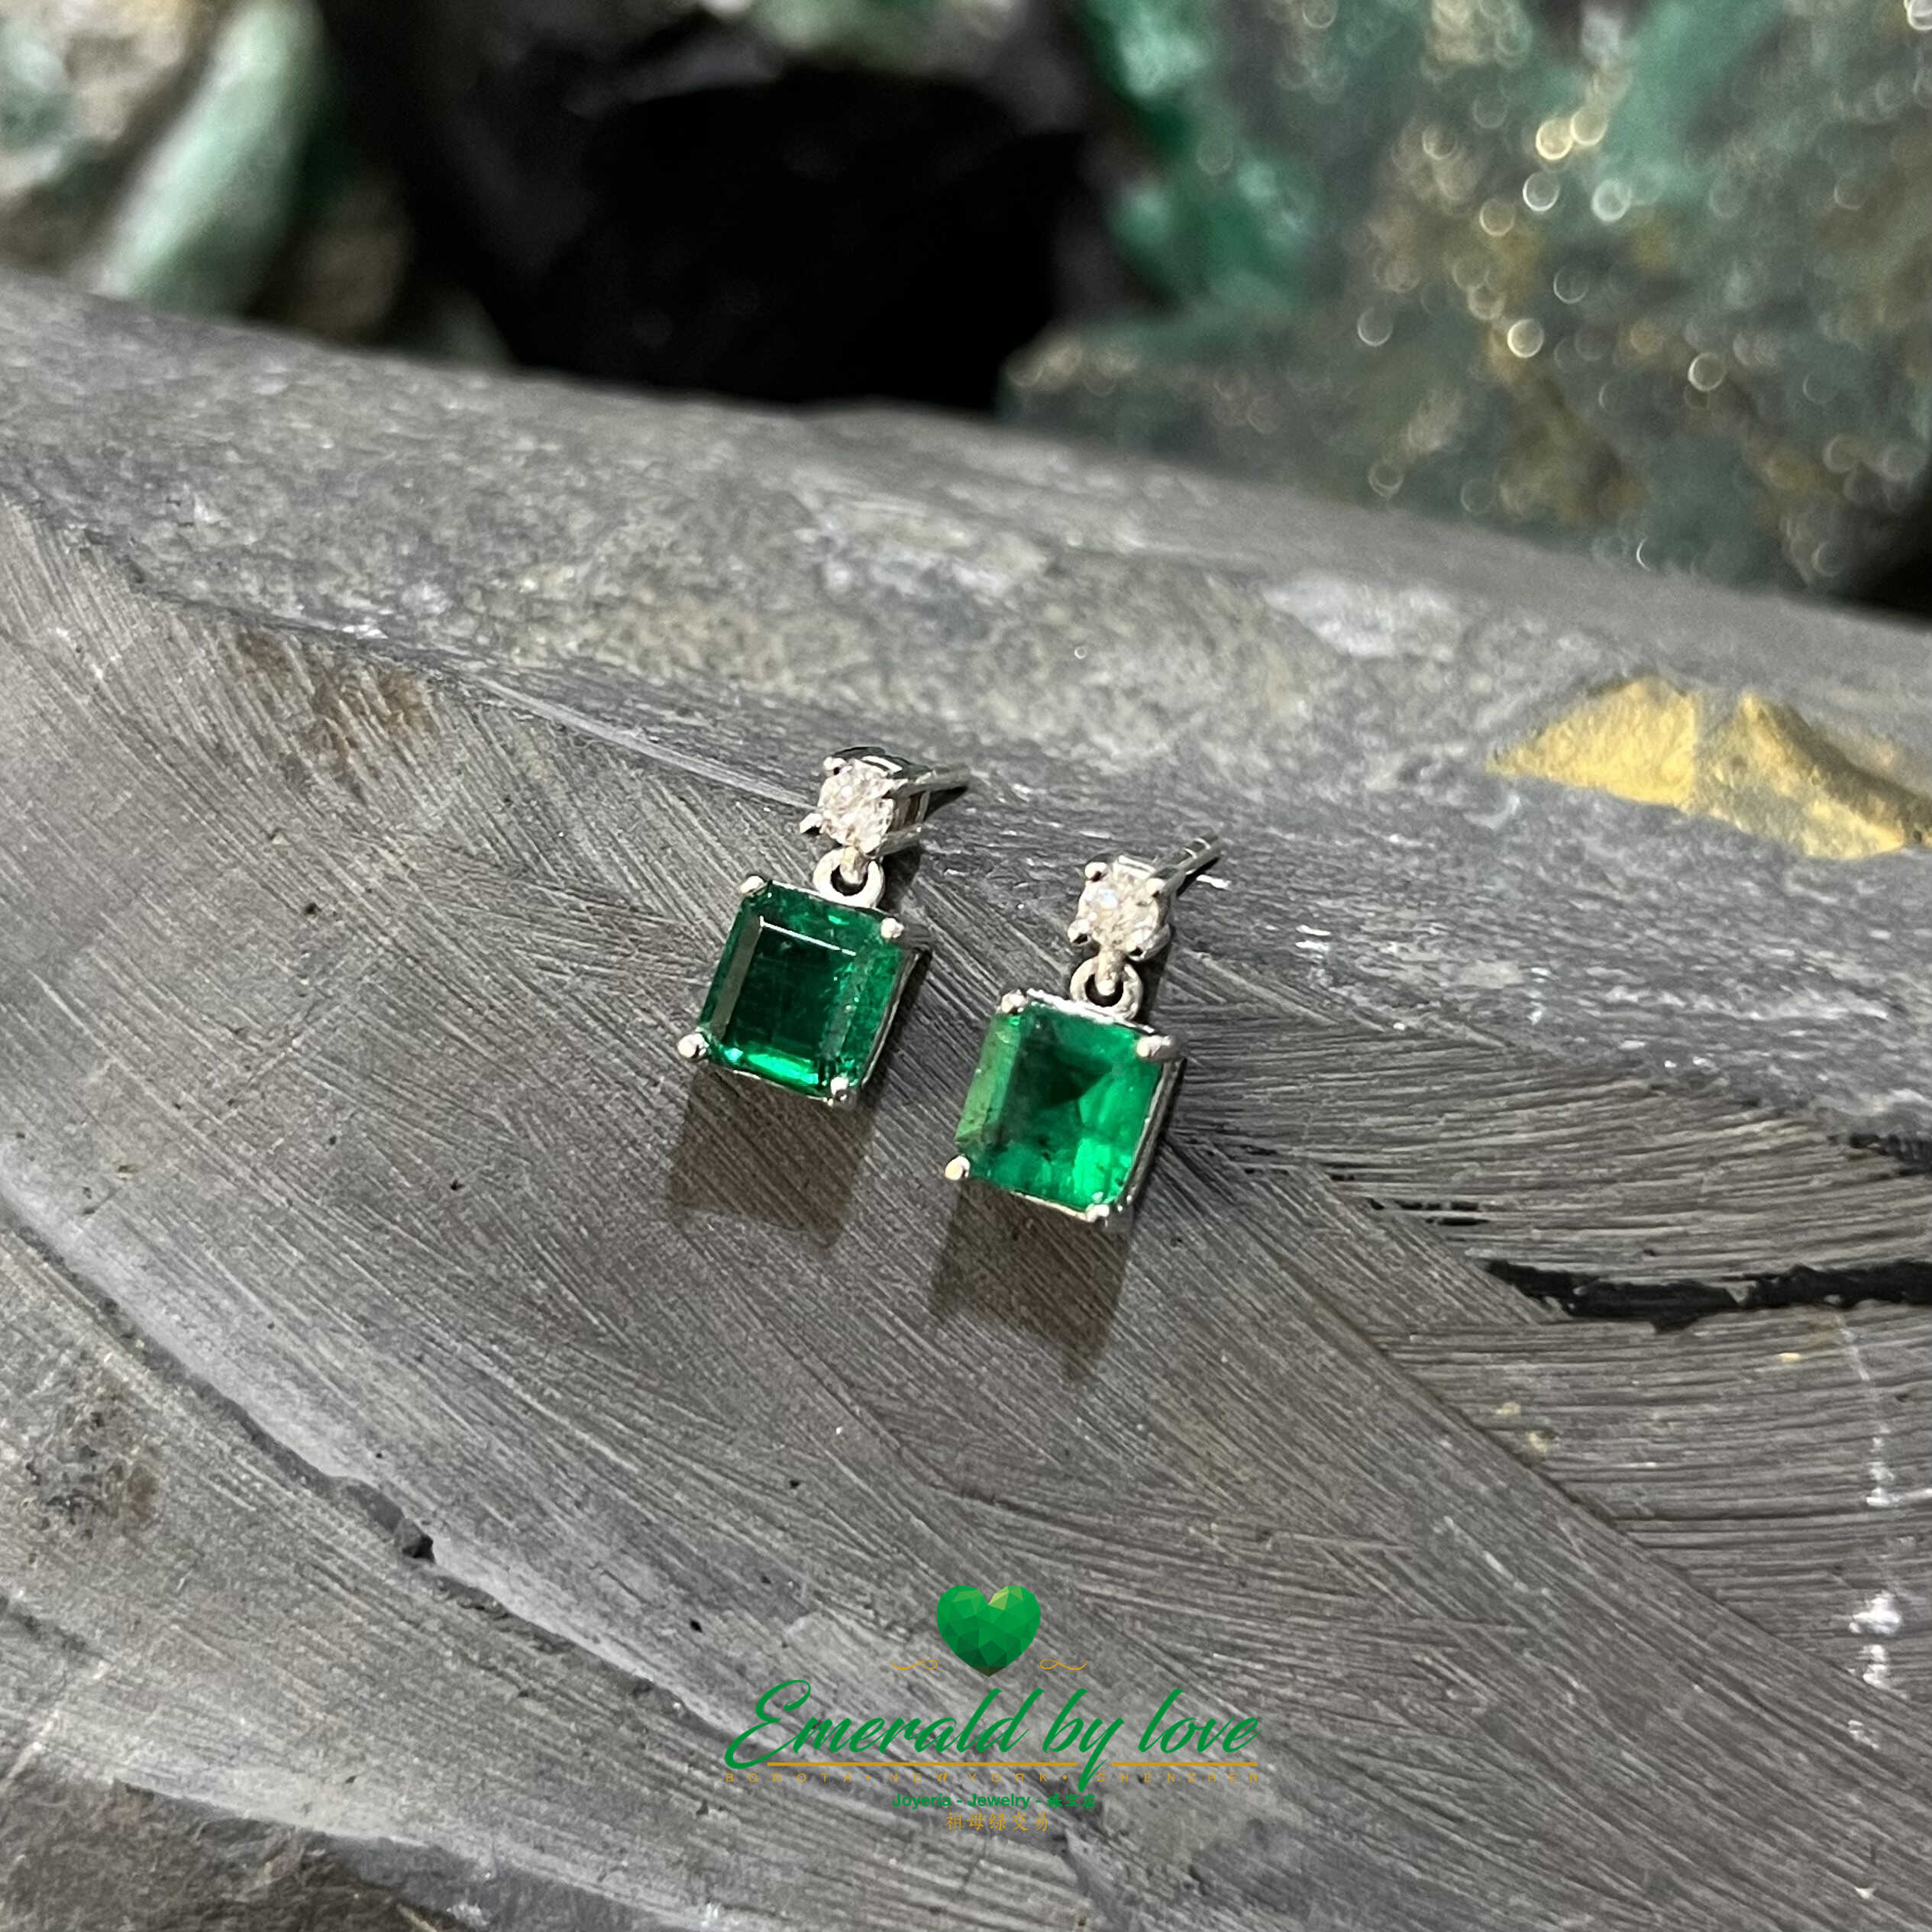 Chic Square Colombian Emerald and Diamond White Gold Earrings - 2.26 tcw Square Gems